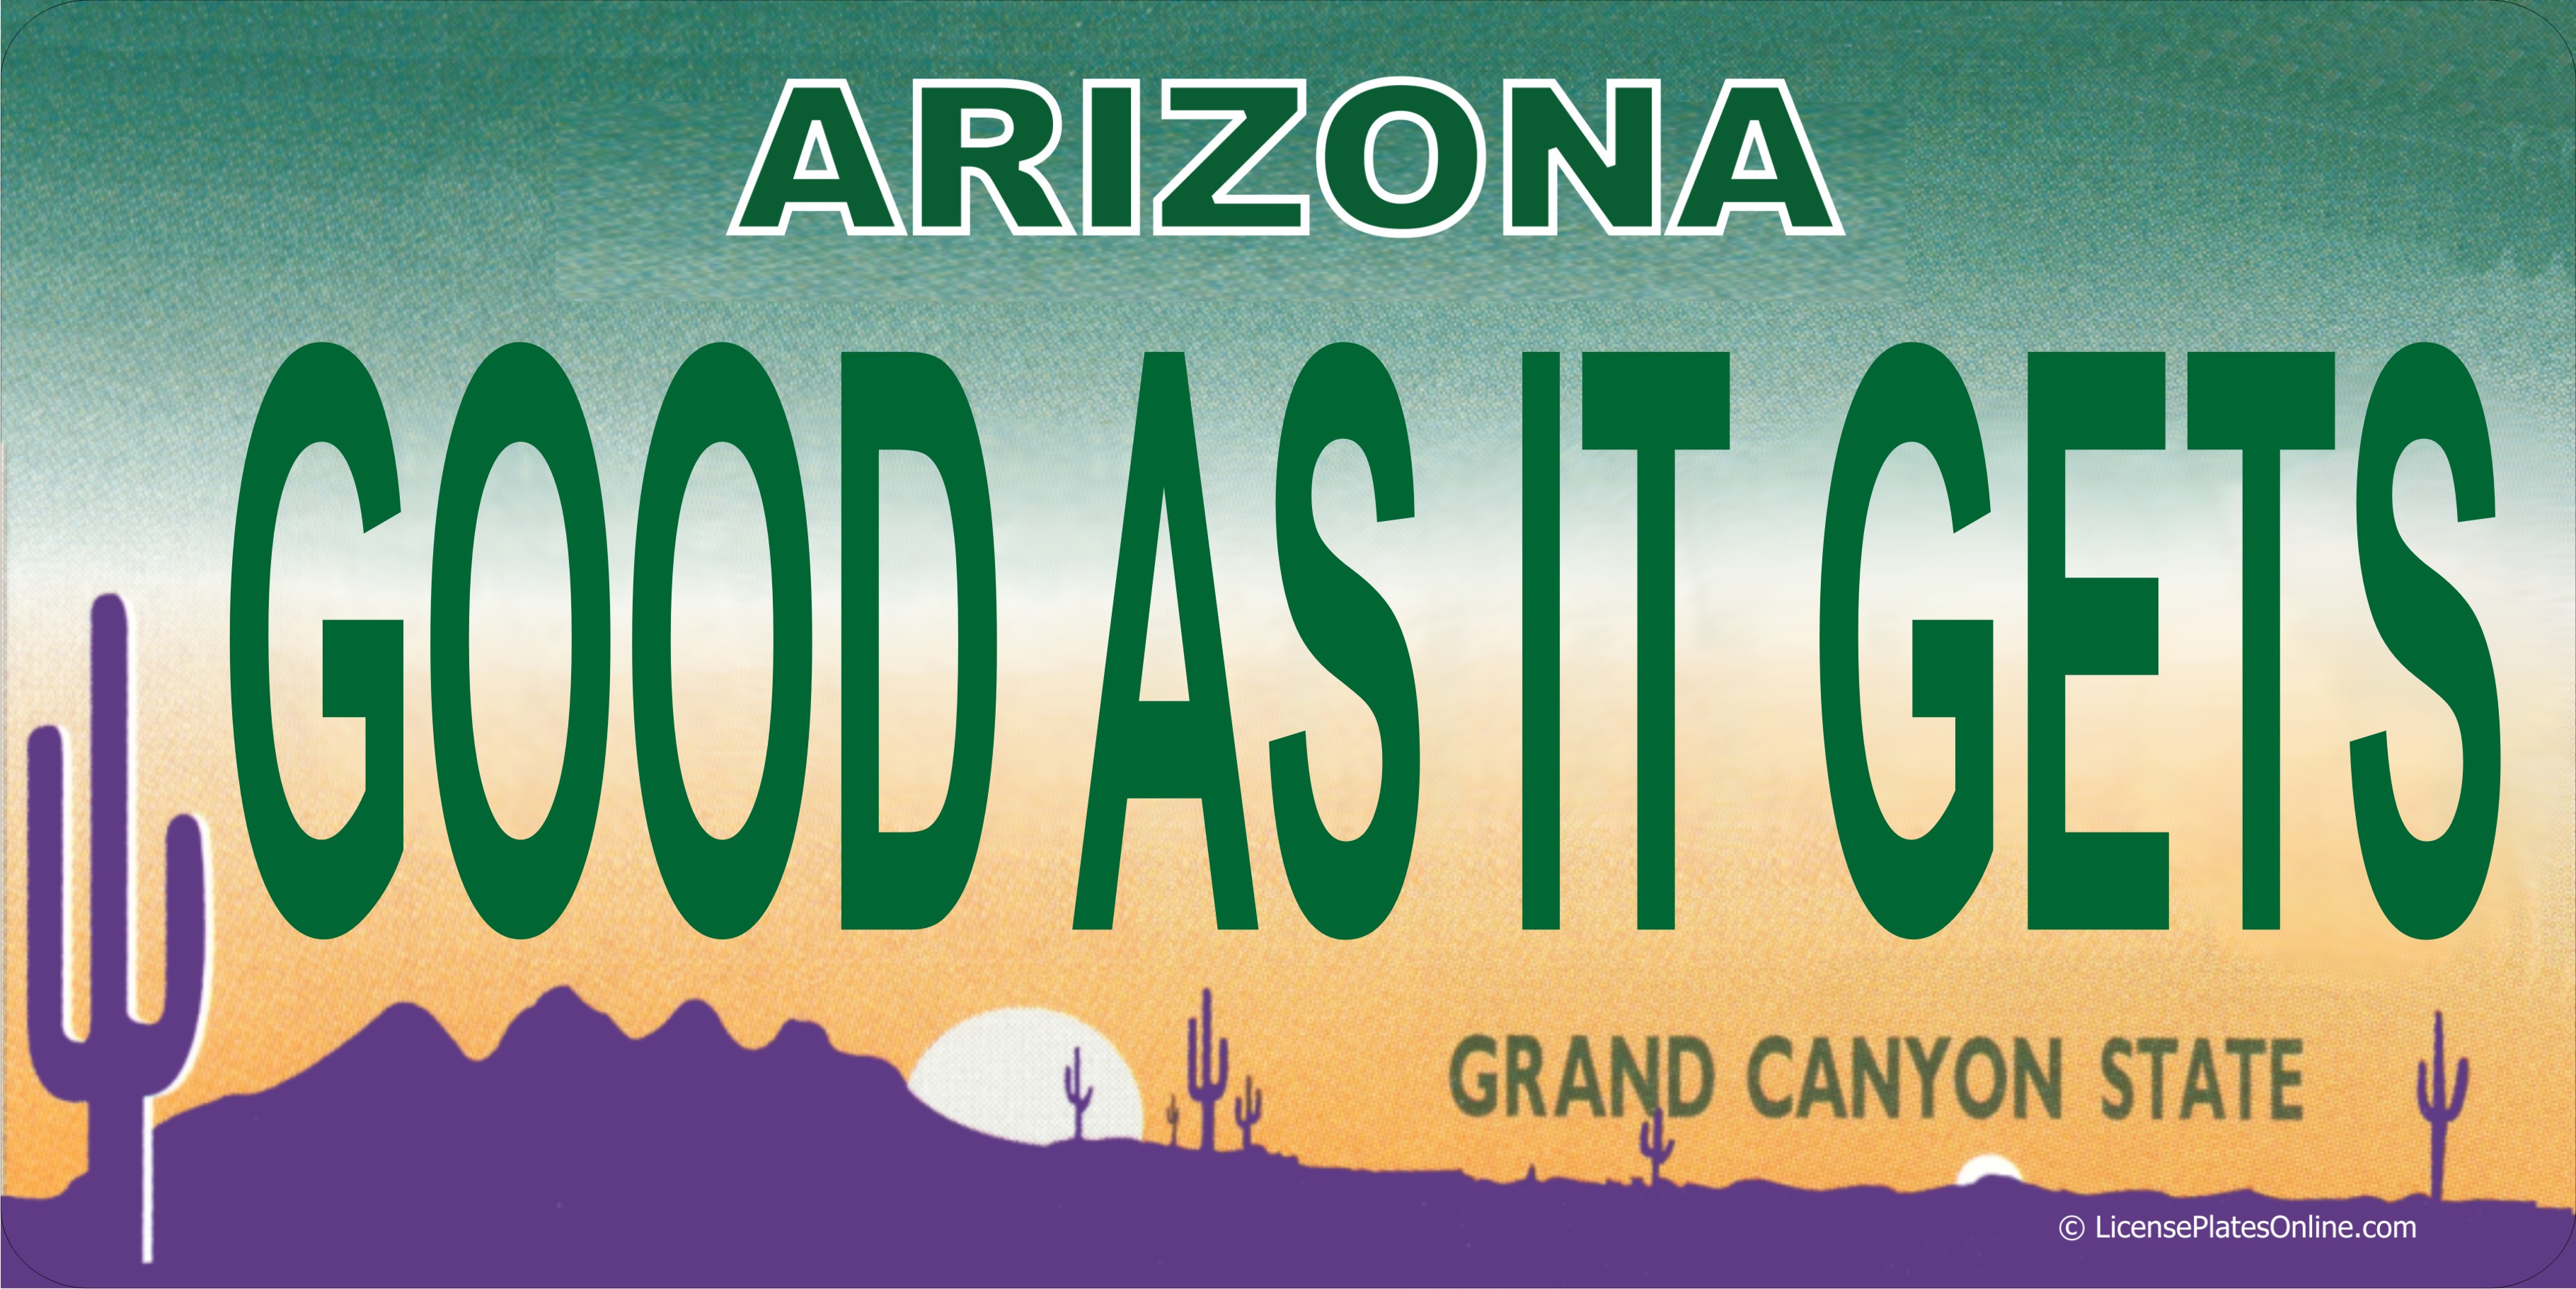 AZ GOOD AS IT GETS Photo LICENSE PLATE  Free Personalization on this PLATE